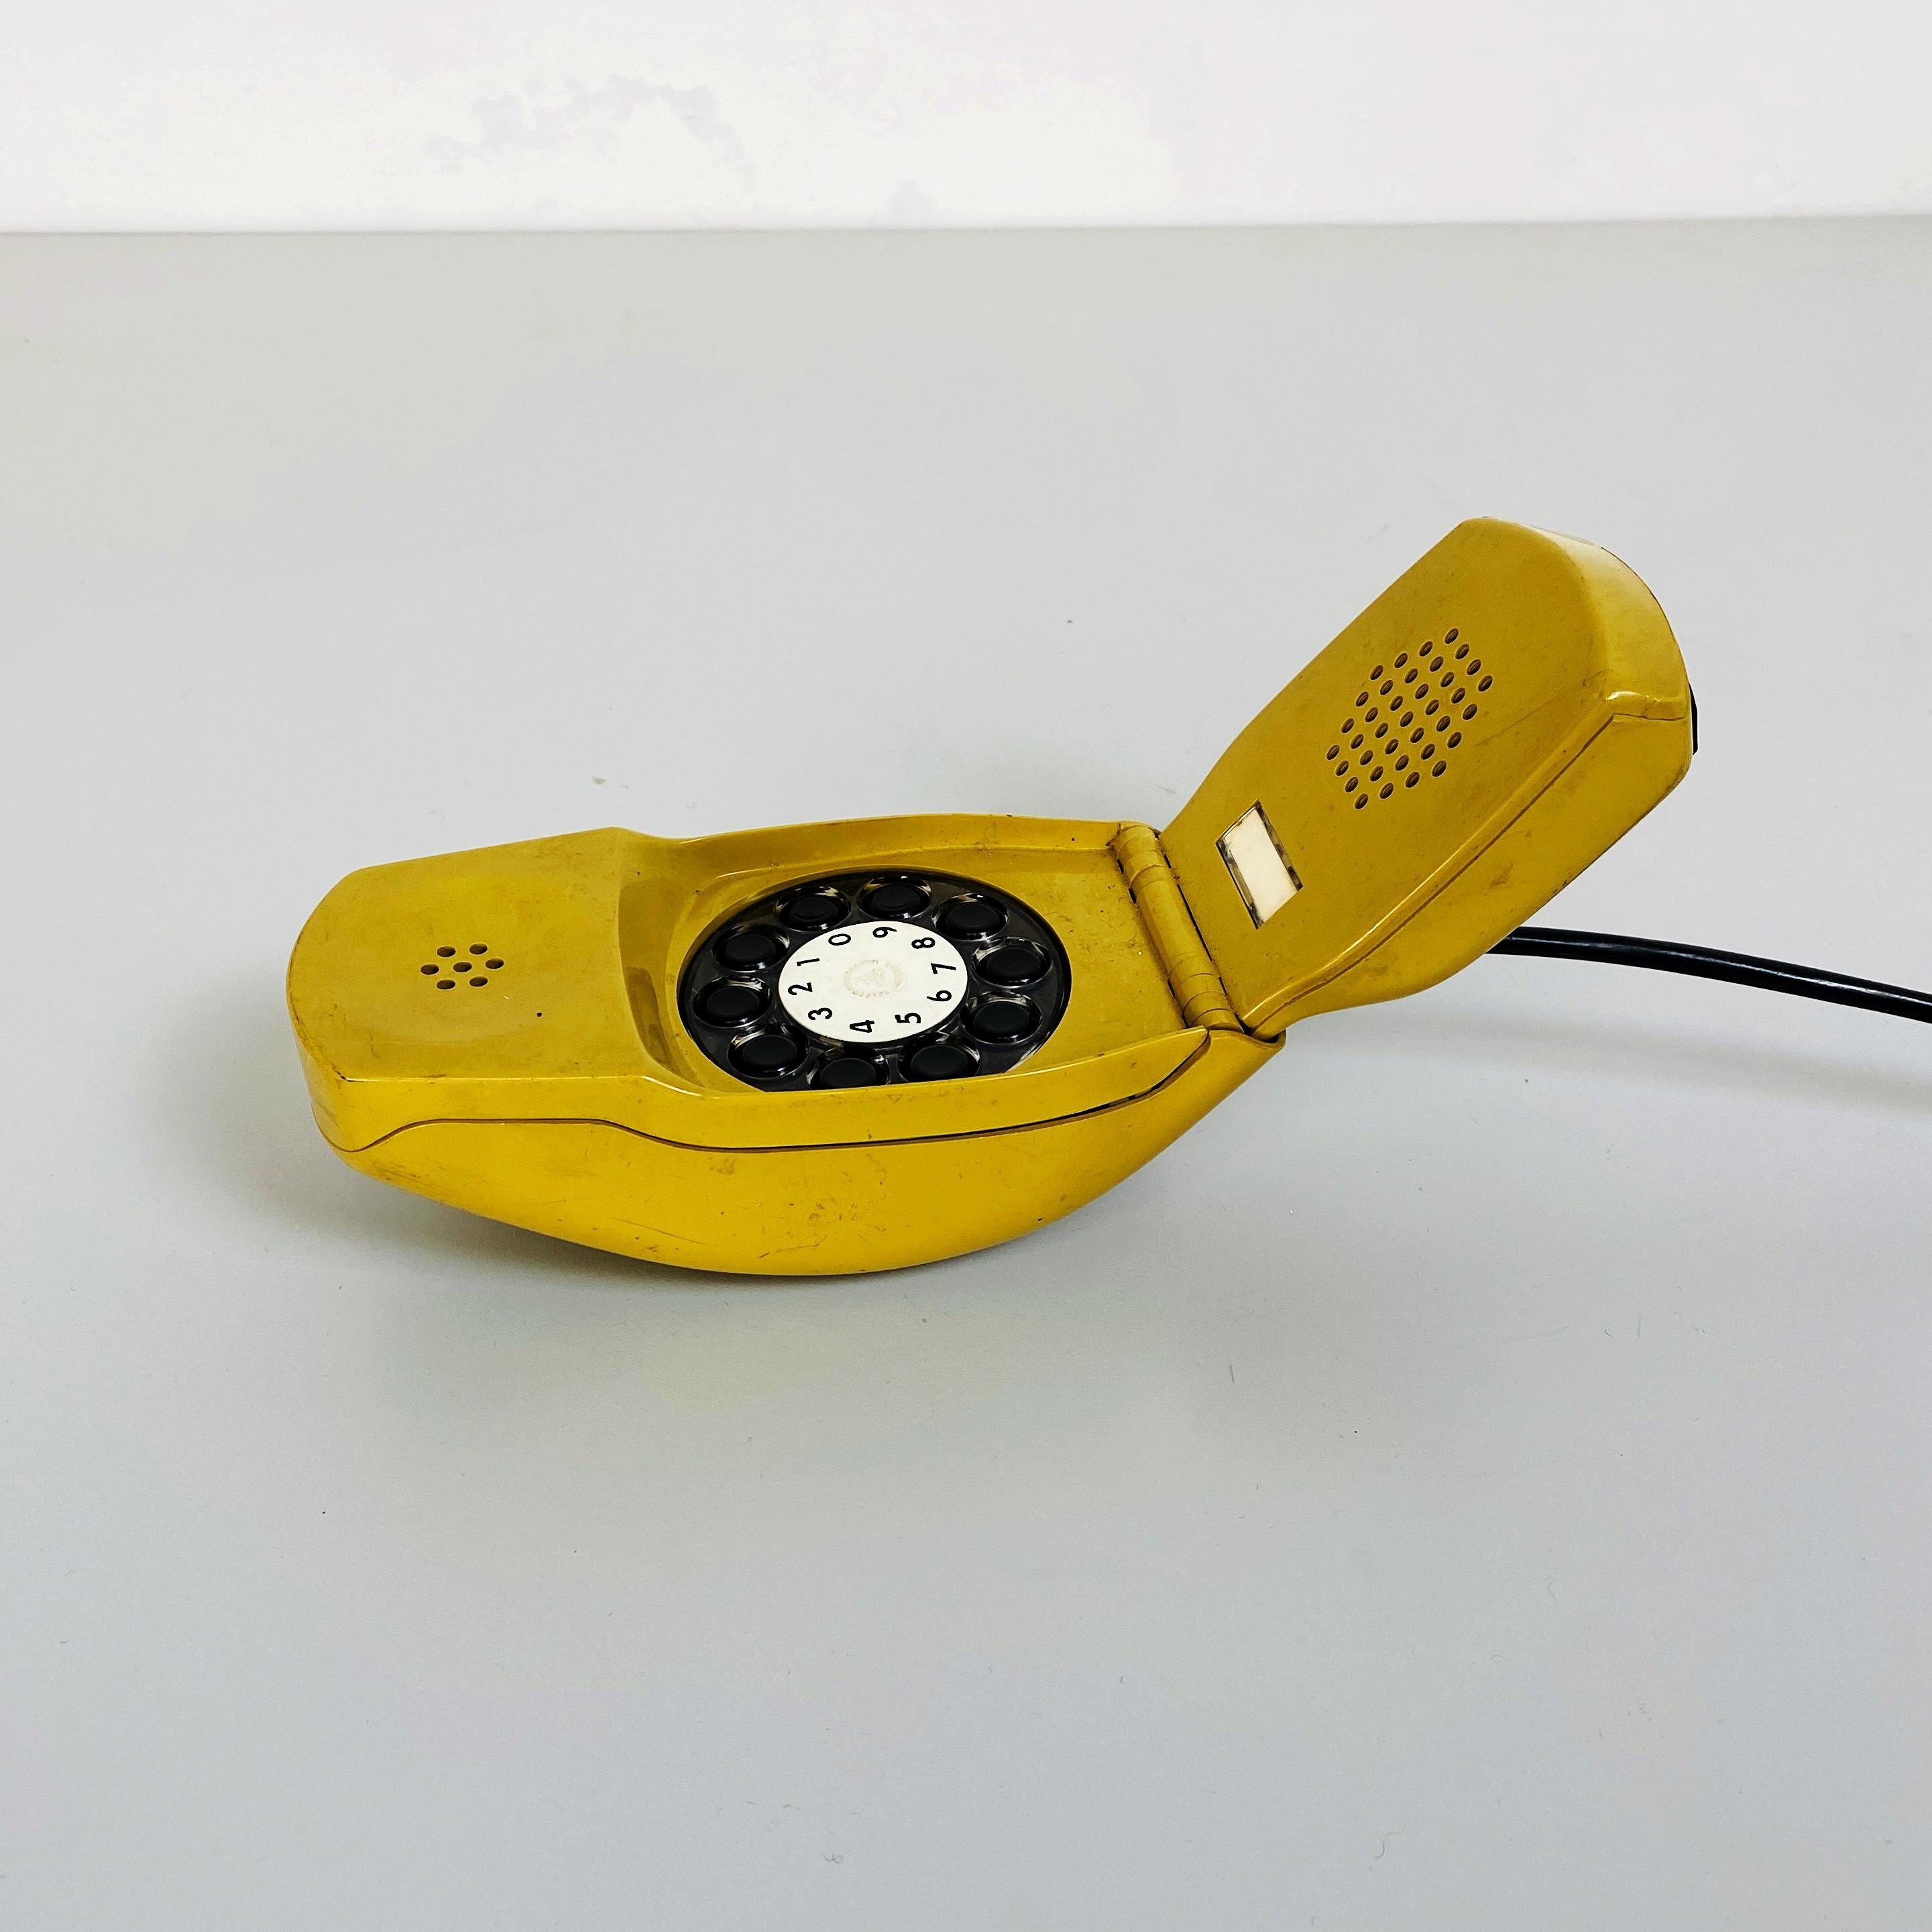 Mid-Century Modern Yellow Telephone Grillo by Marco Zanuso and Richard Sapper for Siemens, 1965